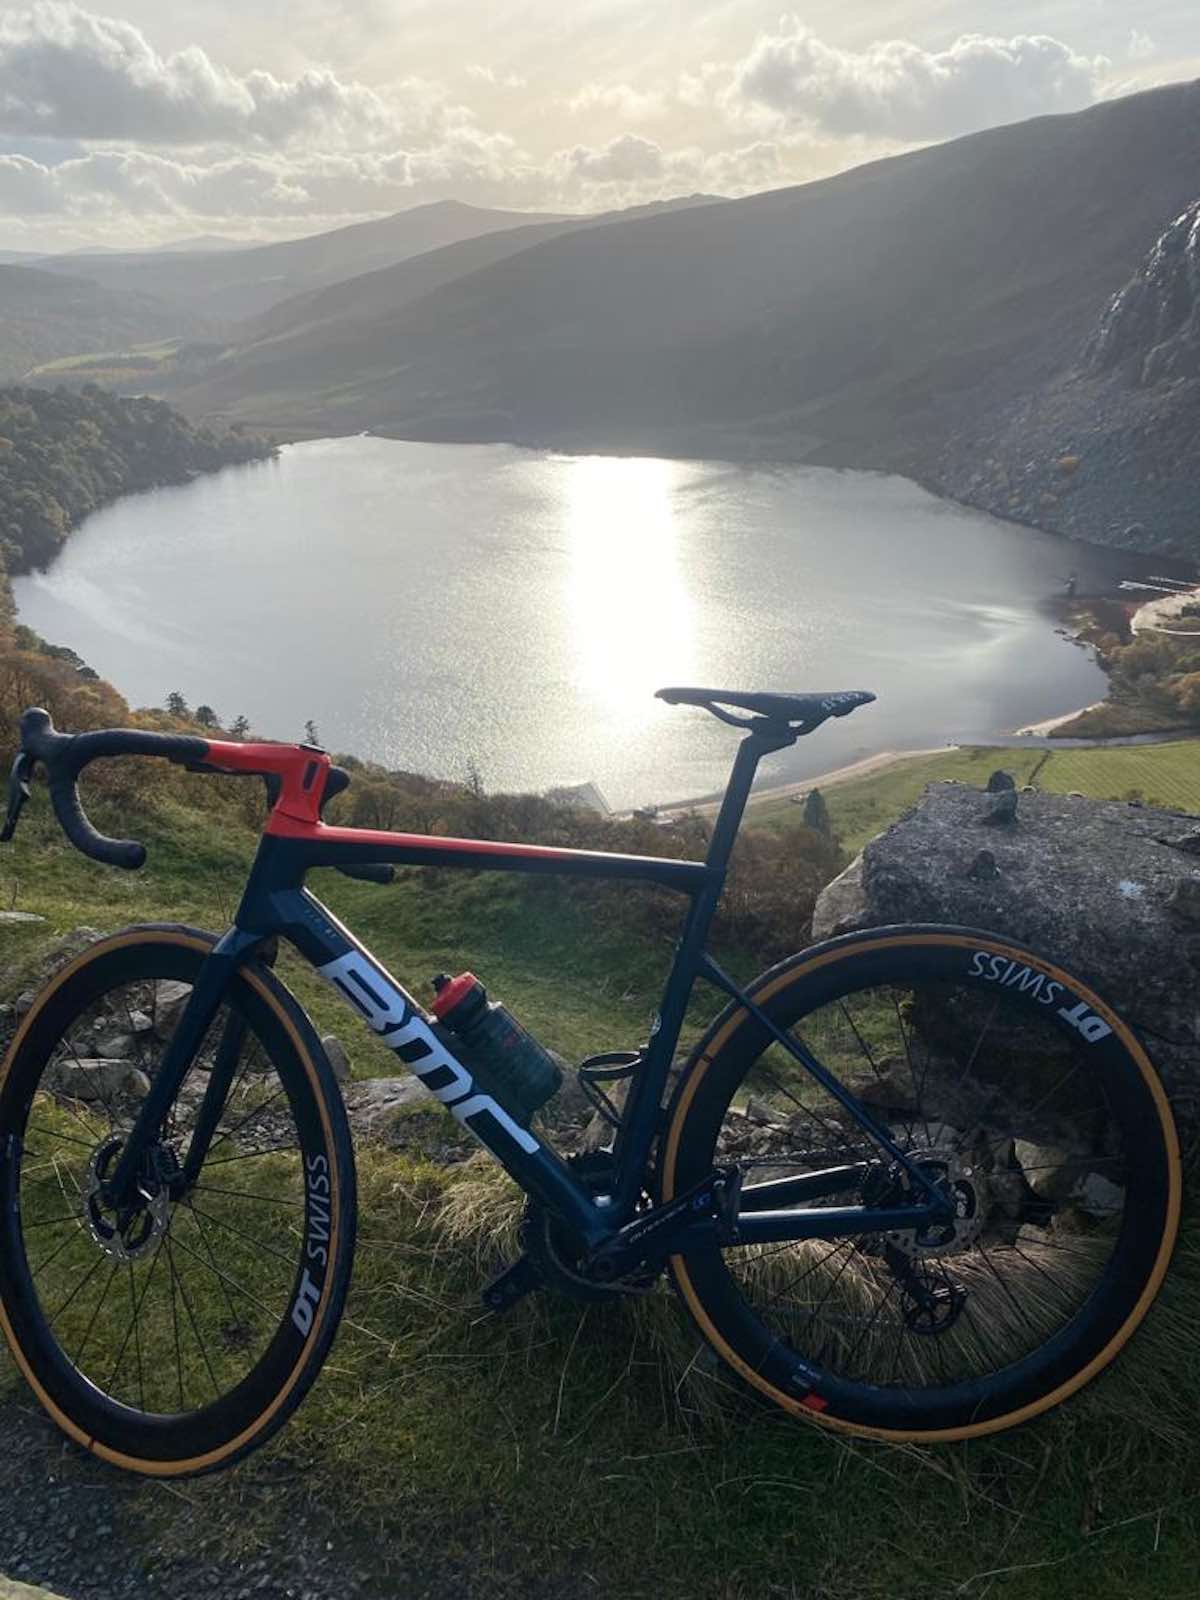 bikerumor pic of the day gmcy bicycle at the top of a mountain looking down into a lake at Bongo’s Hole, King’s Road, County Wicklow, ireland.